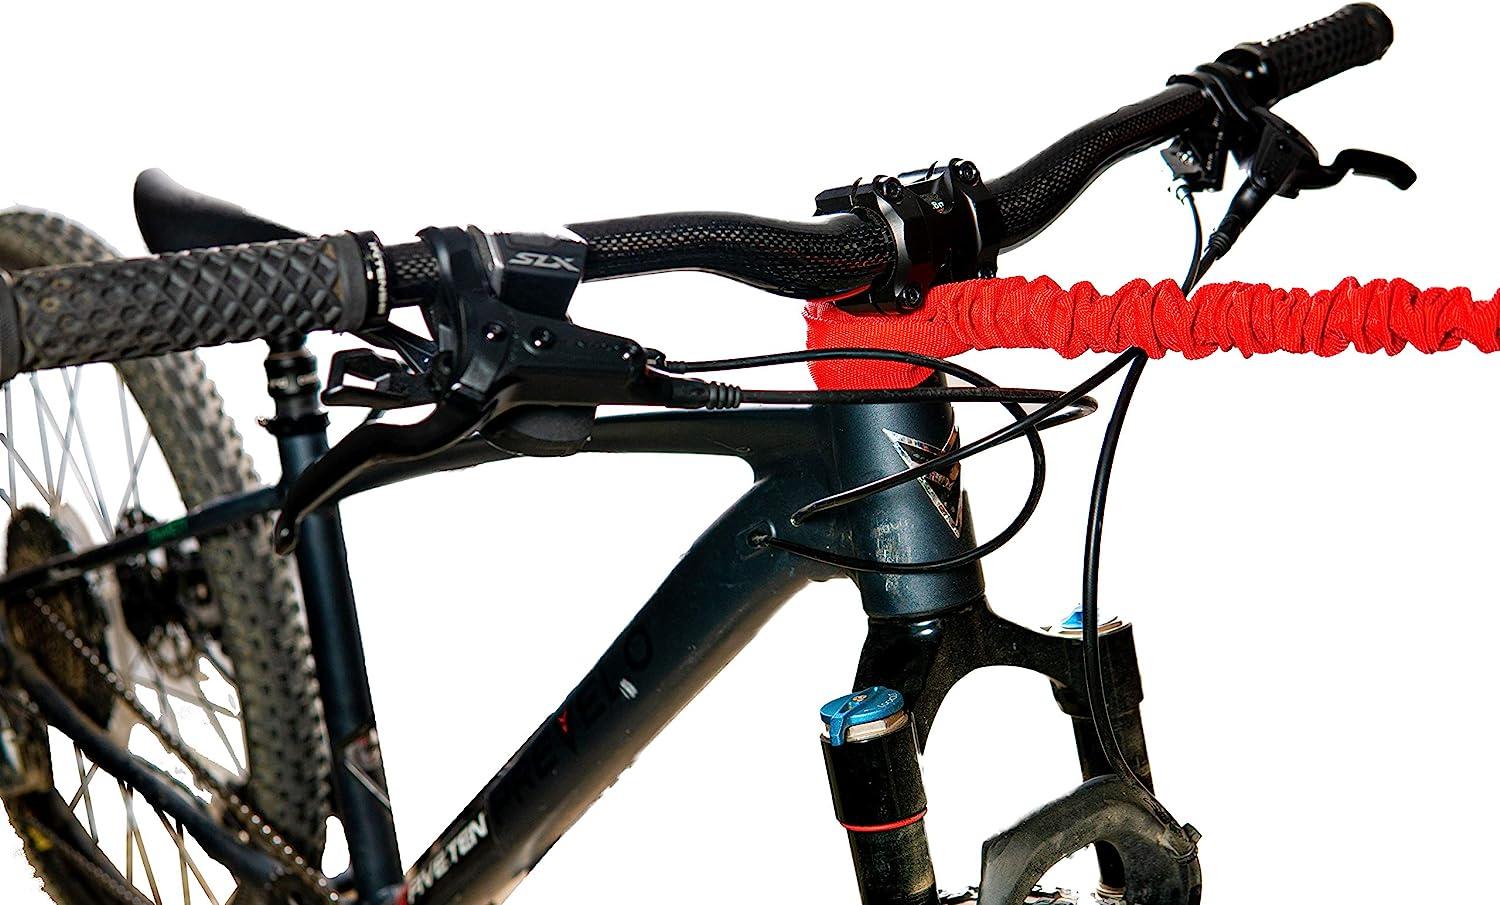 TowWhee Review: Why it's the BEST Bike Tow Rope